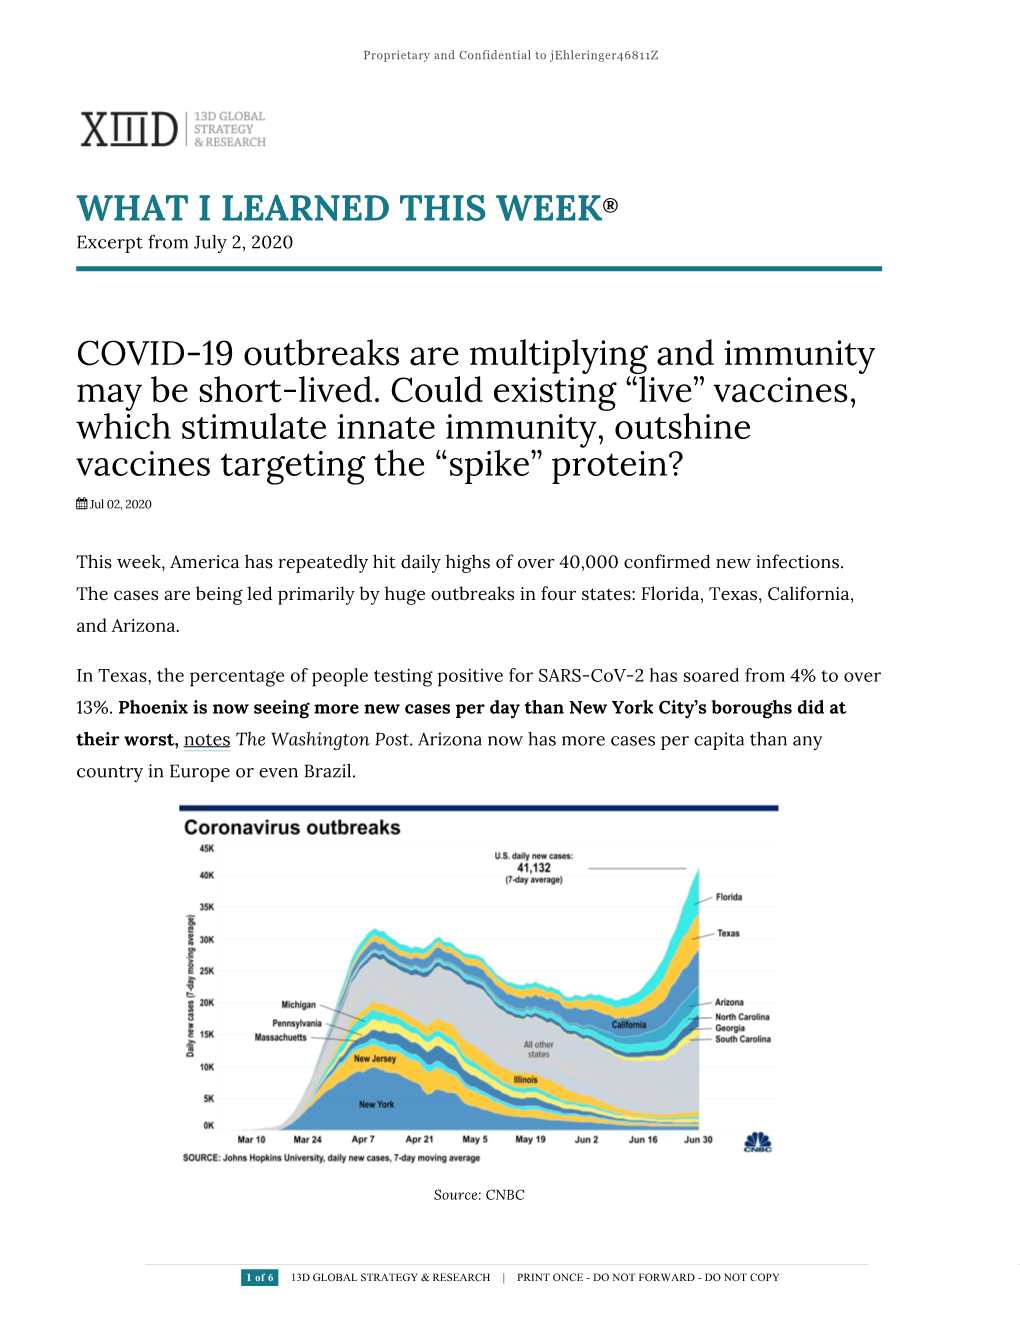 COVID-19 Outbreaks Are Multiplying and Immunity May Be Short-Lived